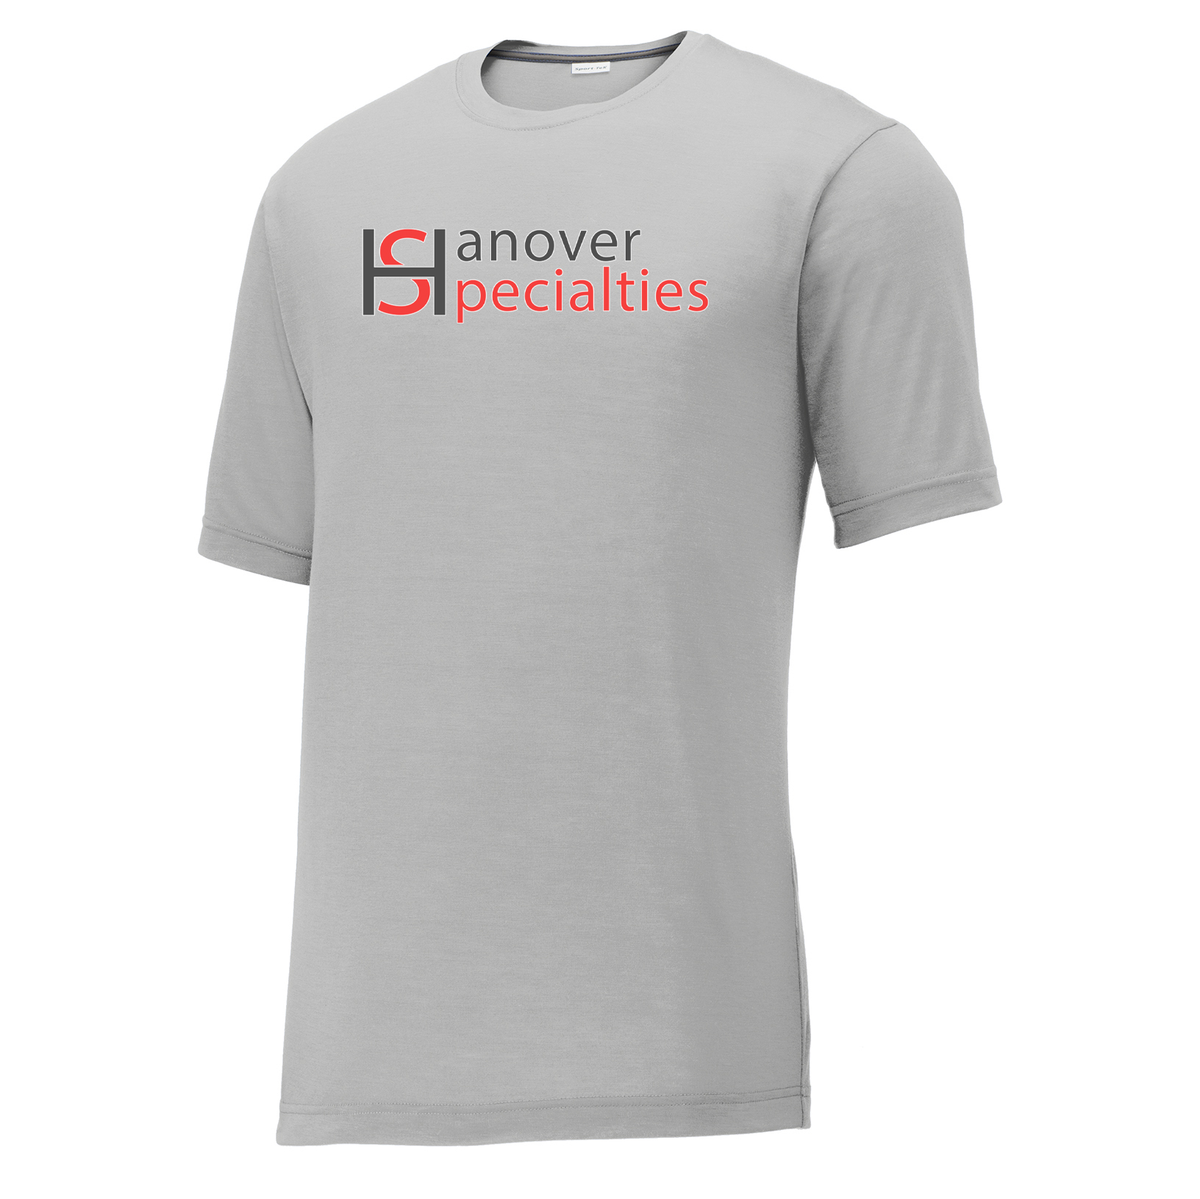 Hanover Specialties CottonTouch Performance T-Shirt